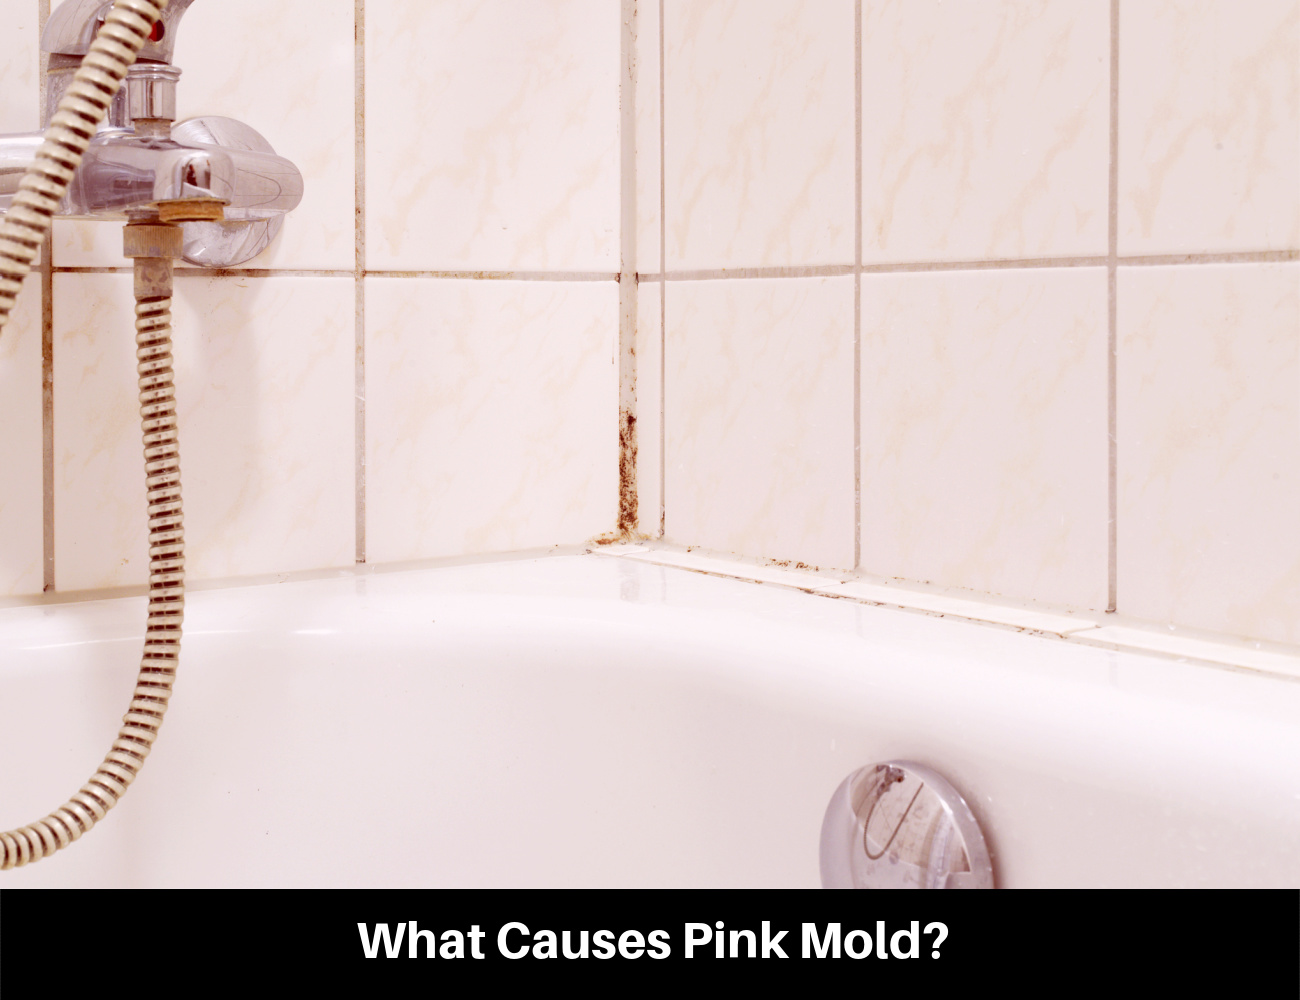 Pink Mold in Shower?